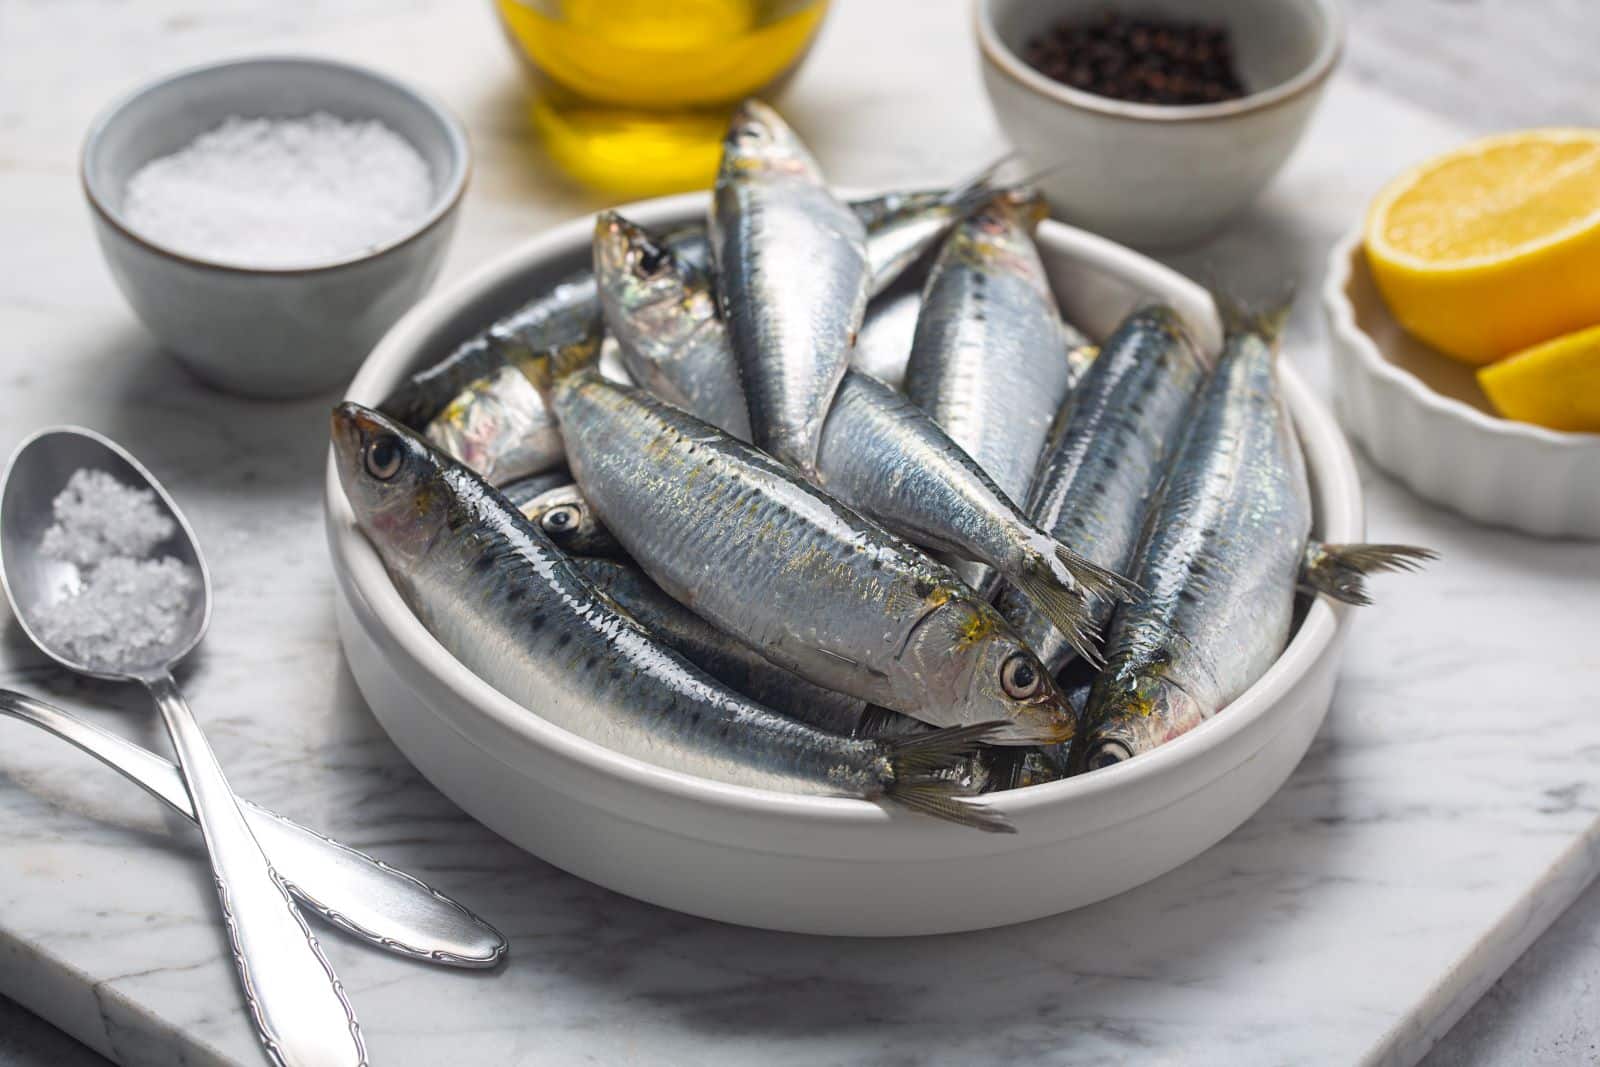 Image Credit: Shutterstock / Civil <p><span>These tiny fish are giants in the nutritional world. Rich in omega-3s and calcium, they’re perfect for a quick snack or a flavorful addition to salads. They remind us that good things often come in small packages.</span></p>